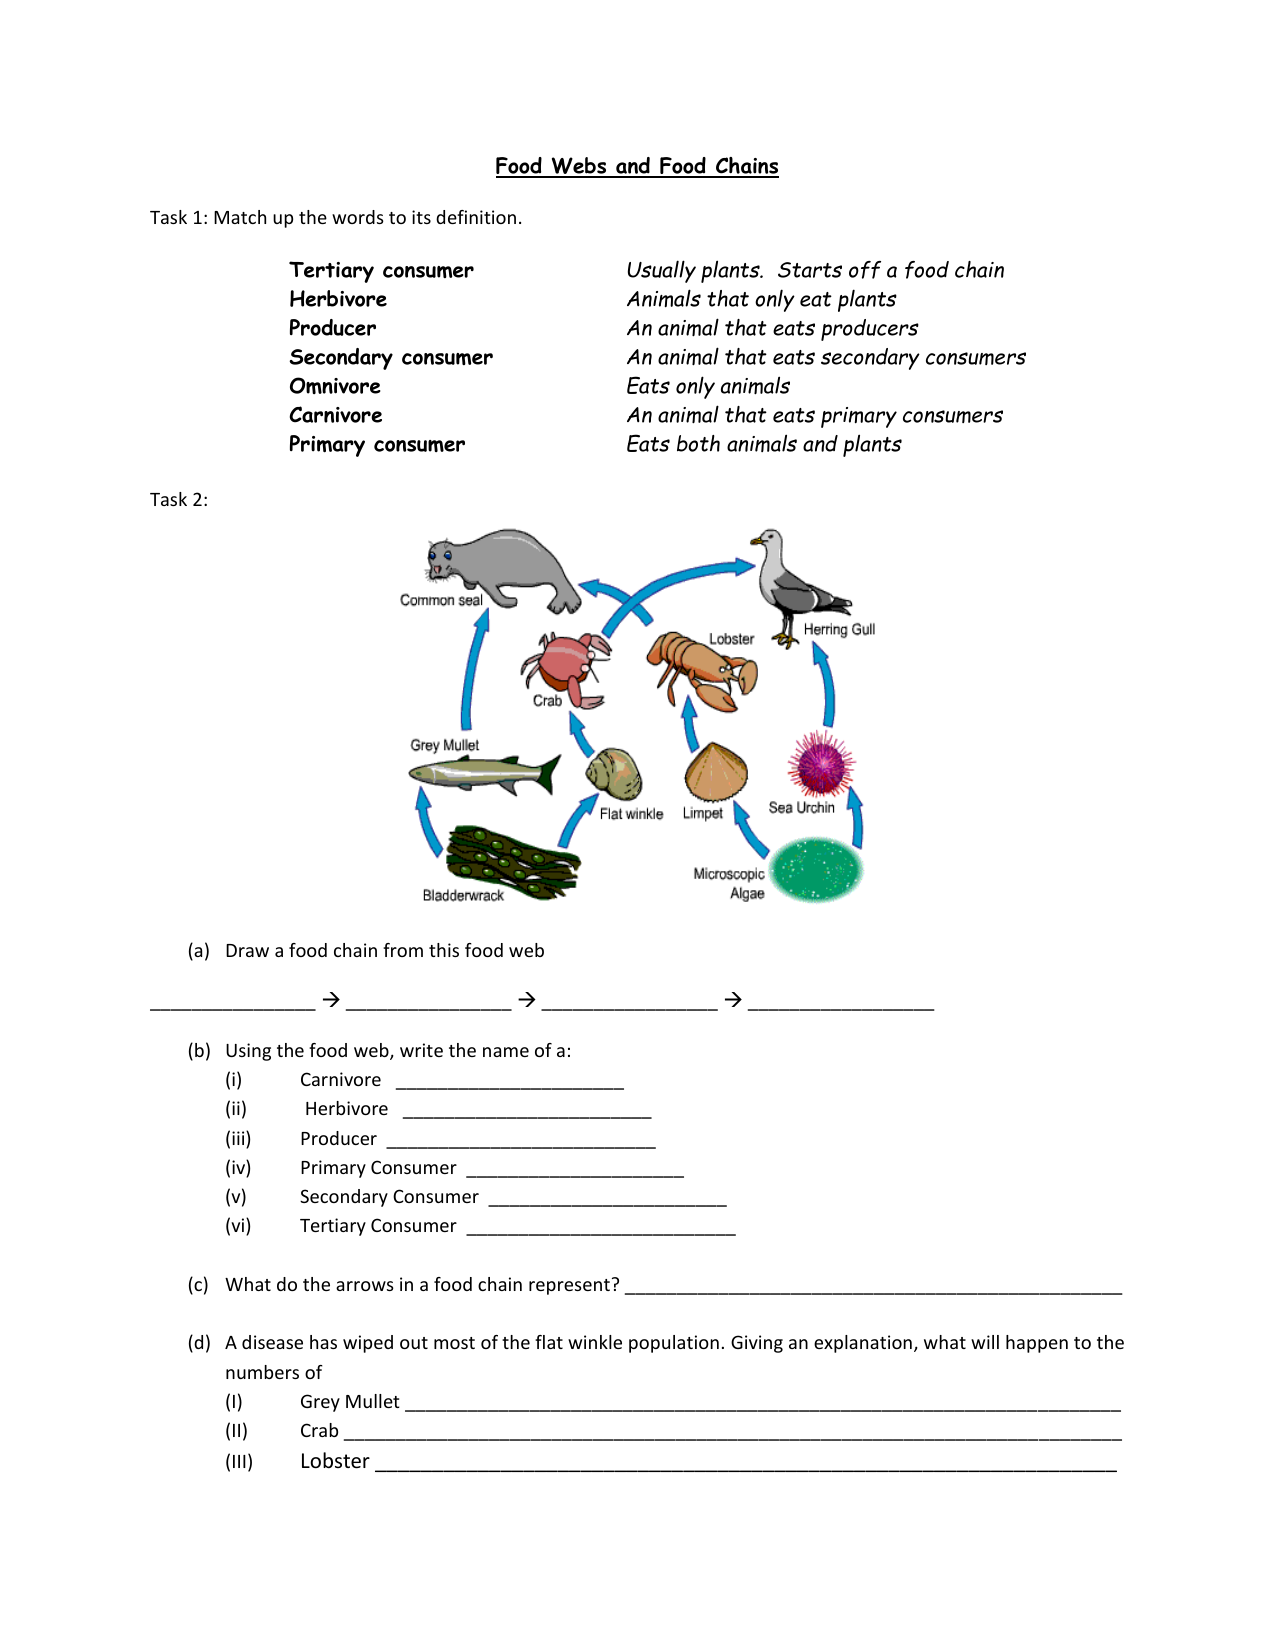 Food Chains and Webs worksheet In Food Chains And Webs Worksheet